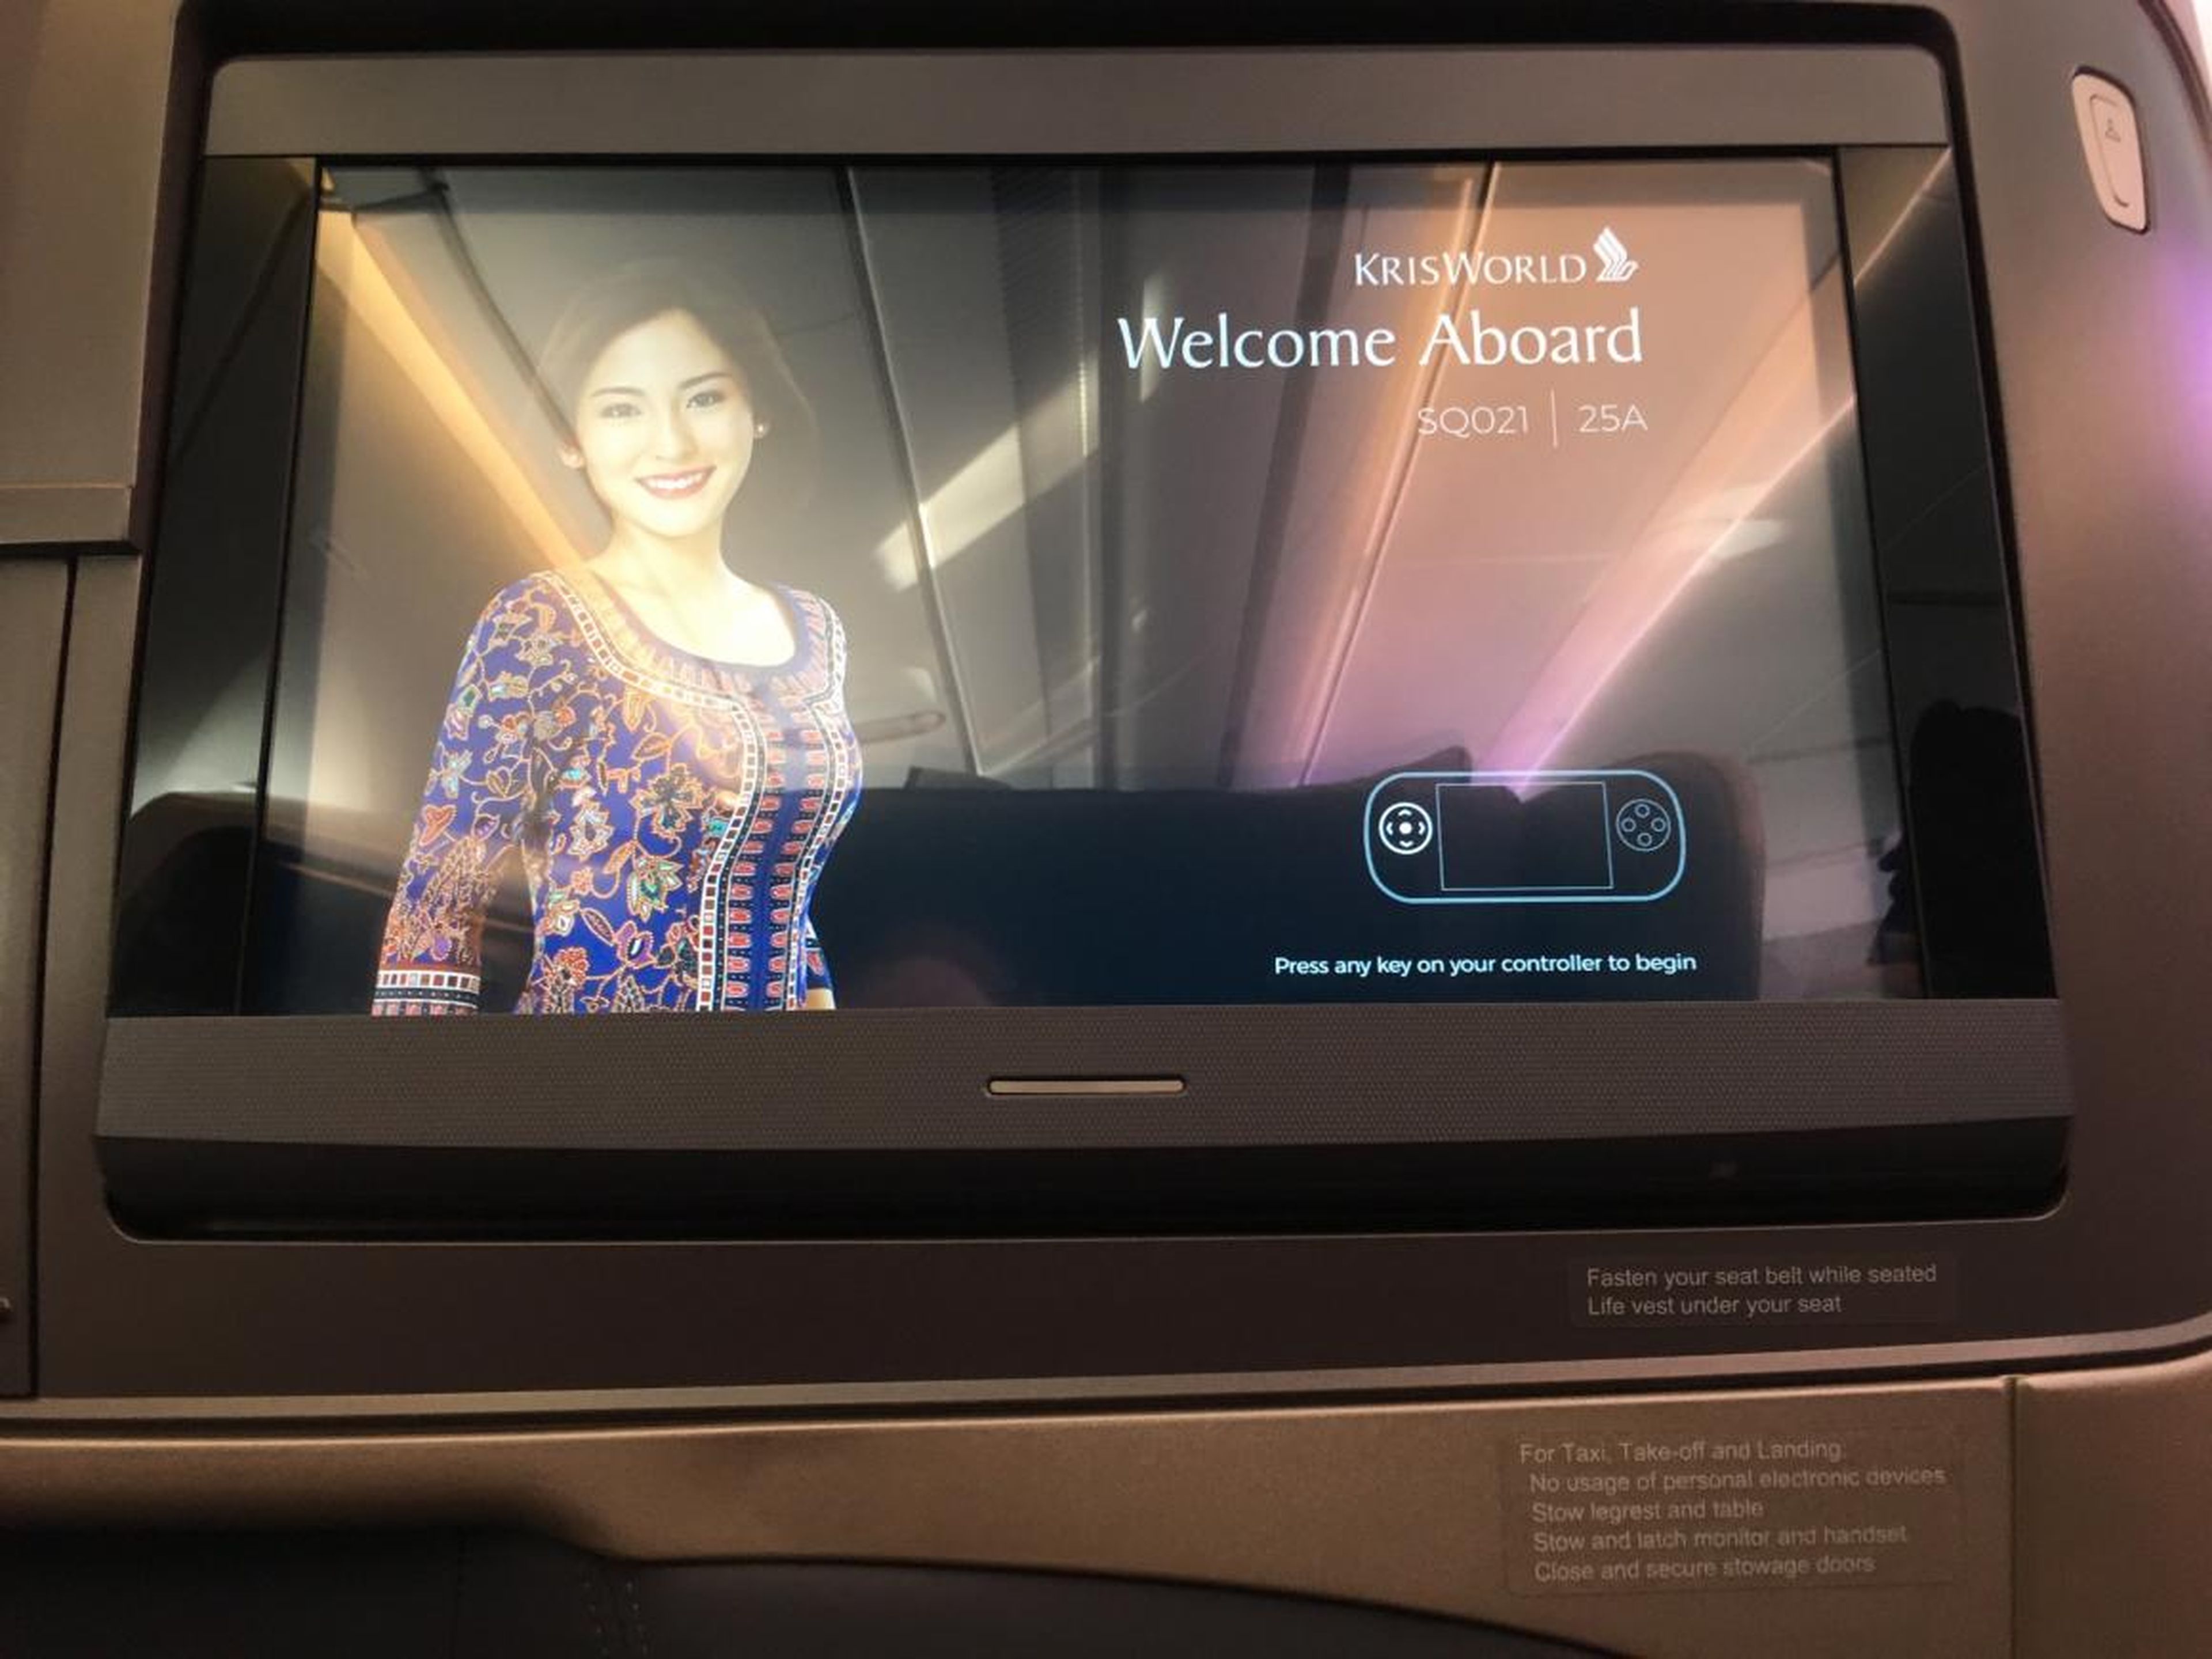 Back to the 18-inch screen: It's running Singapore's KrisWorld in-flight entertainment system.